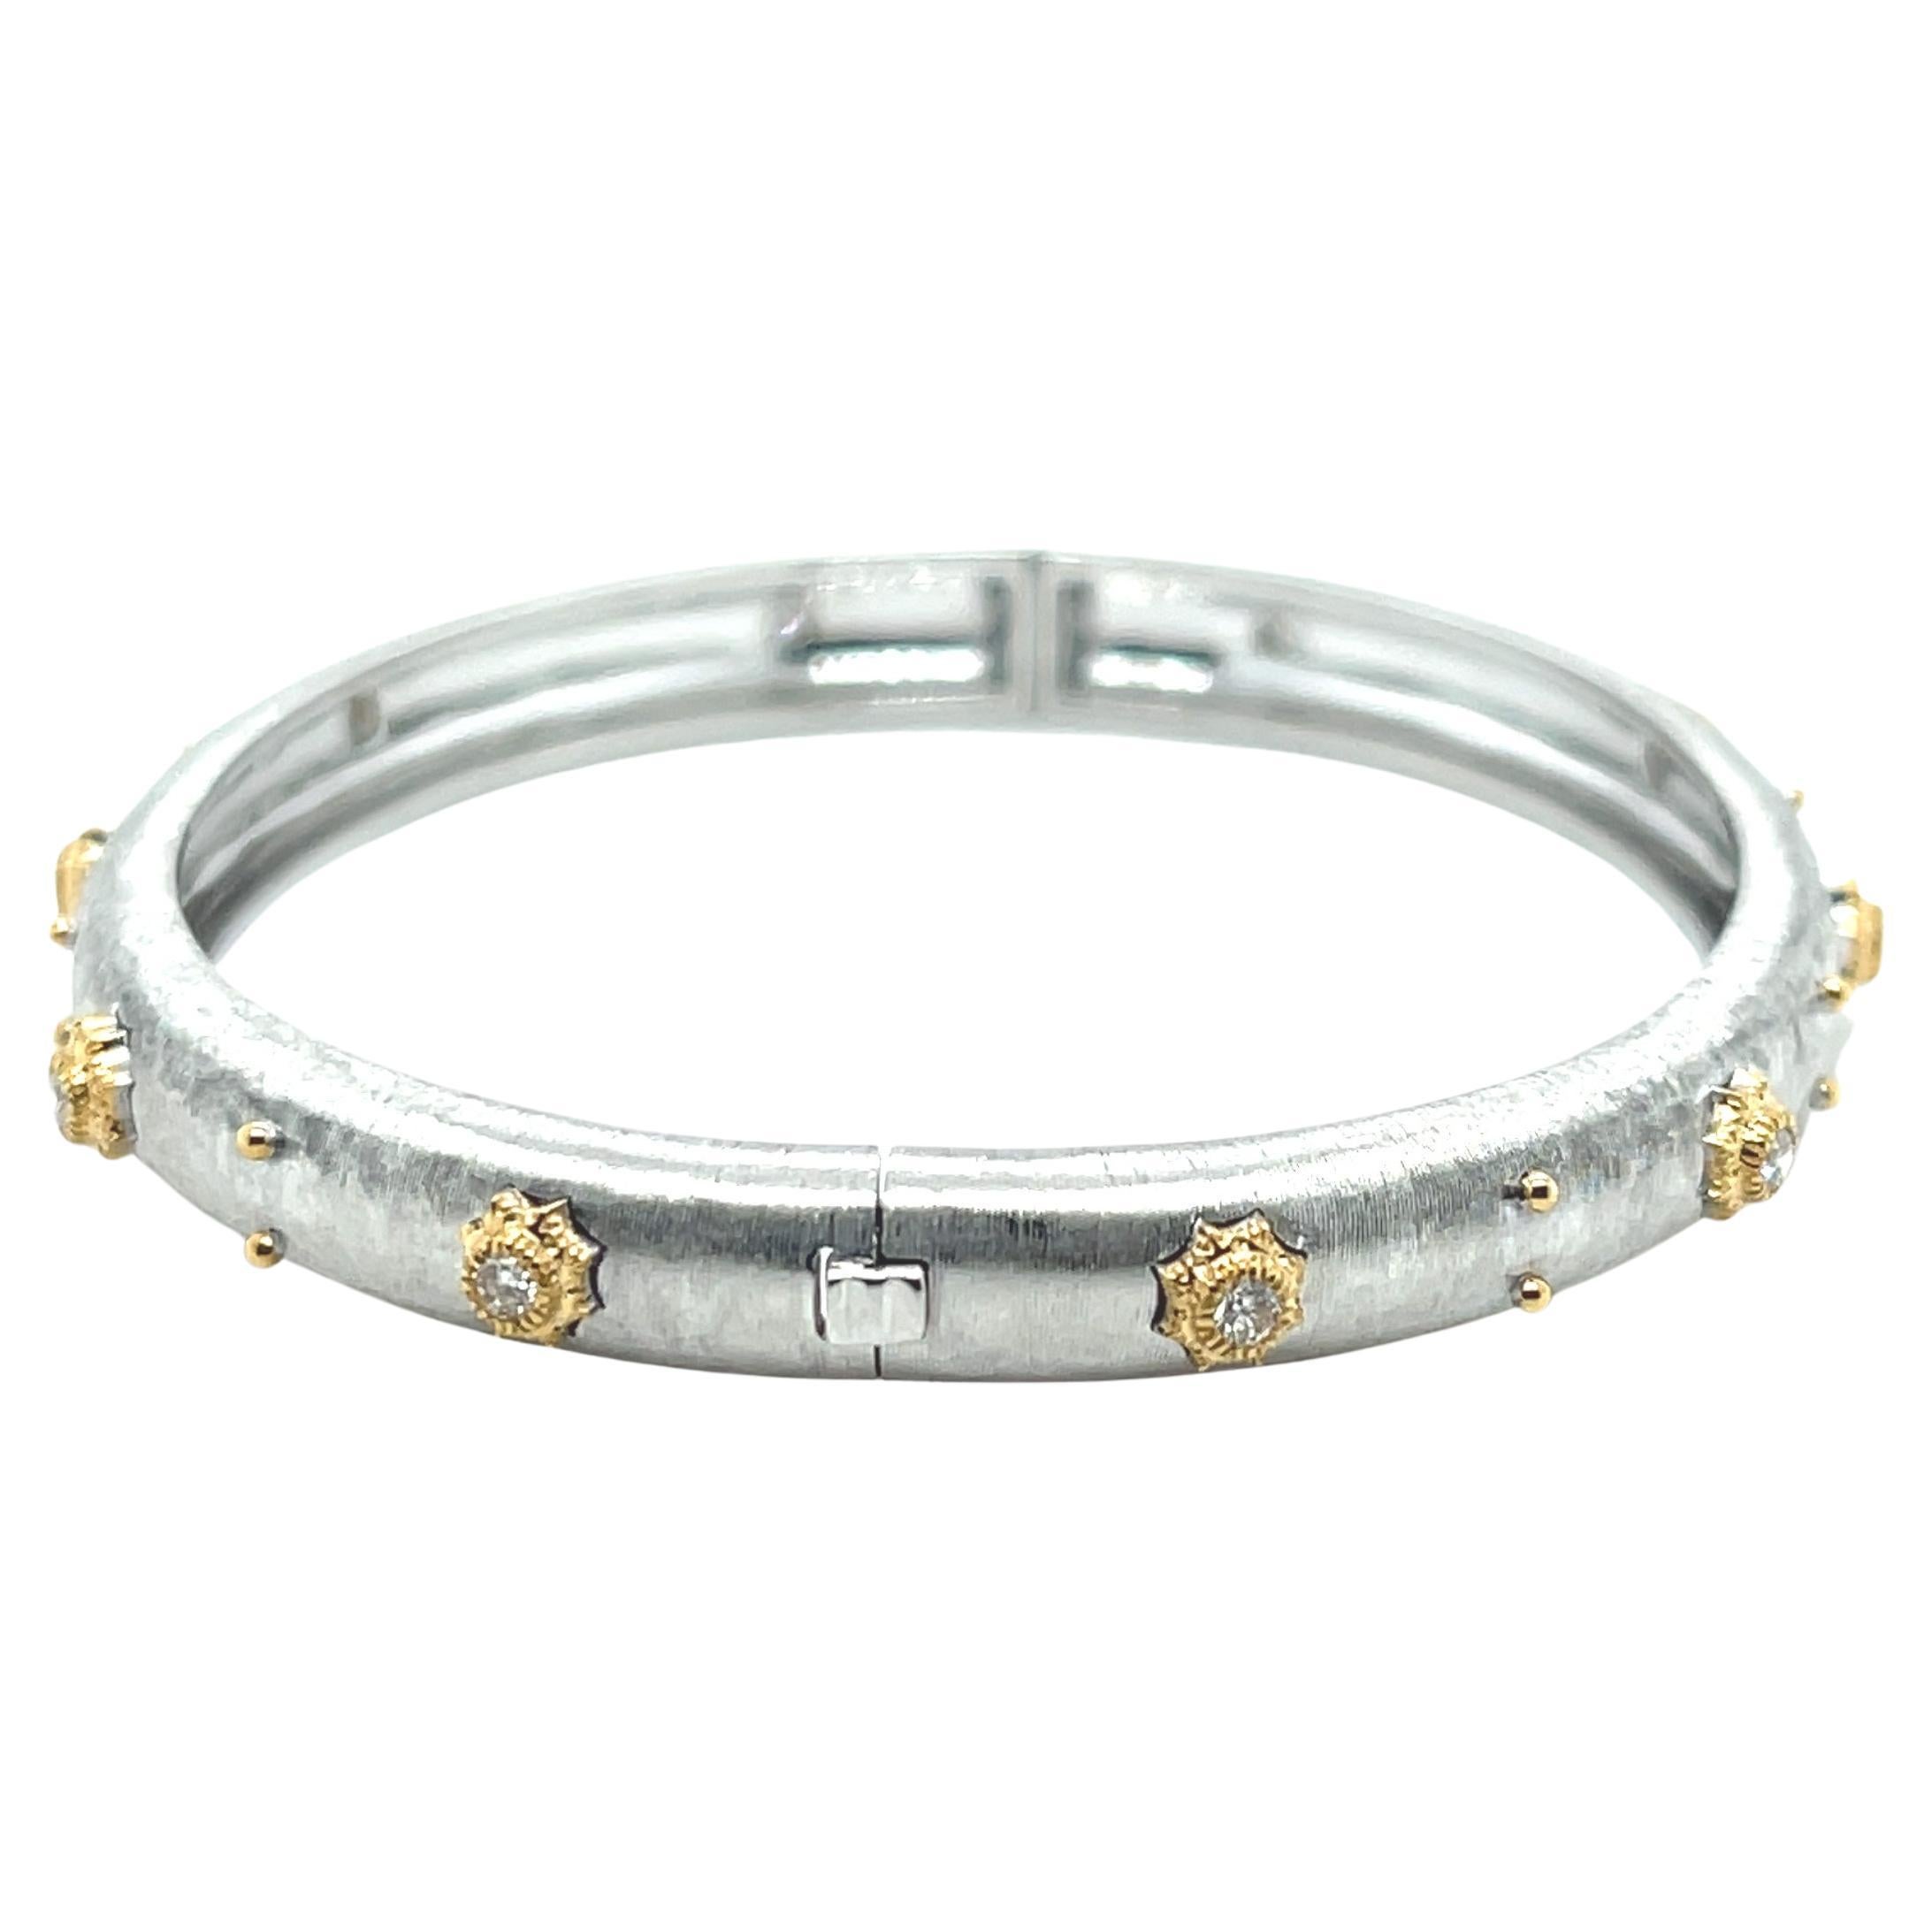 This beautiful Florentine white gold bangle bracelet is set with ten sparkling round brilliant diamonds weighing .30 carats total. Each diamond is bezel set in an 18k yellow gold finely-detailed starburst bezel. The 18k white gold bangle has an